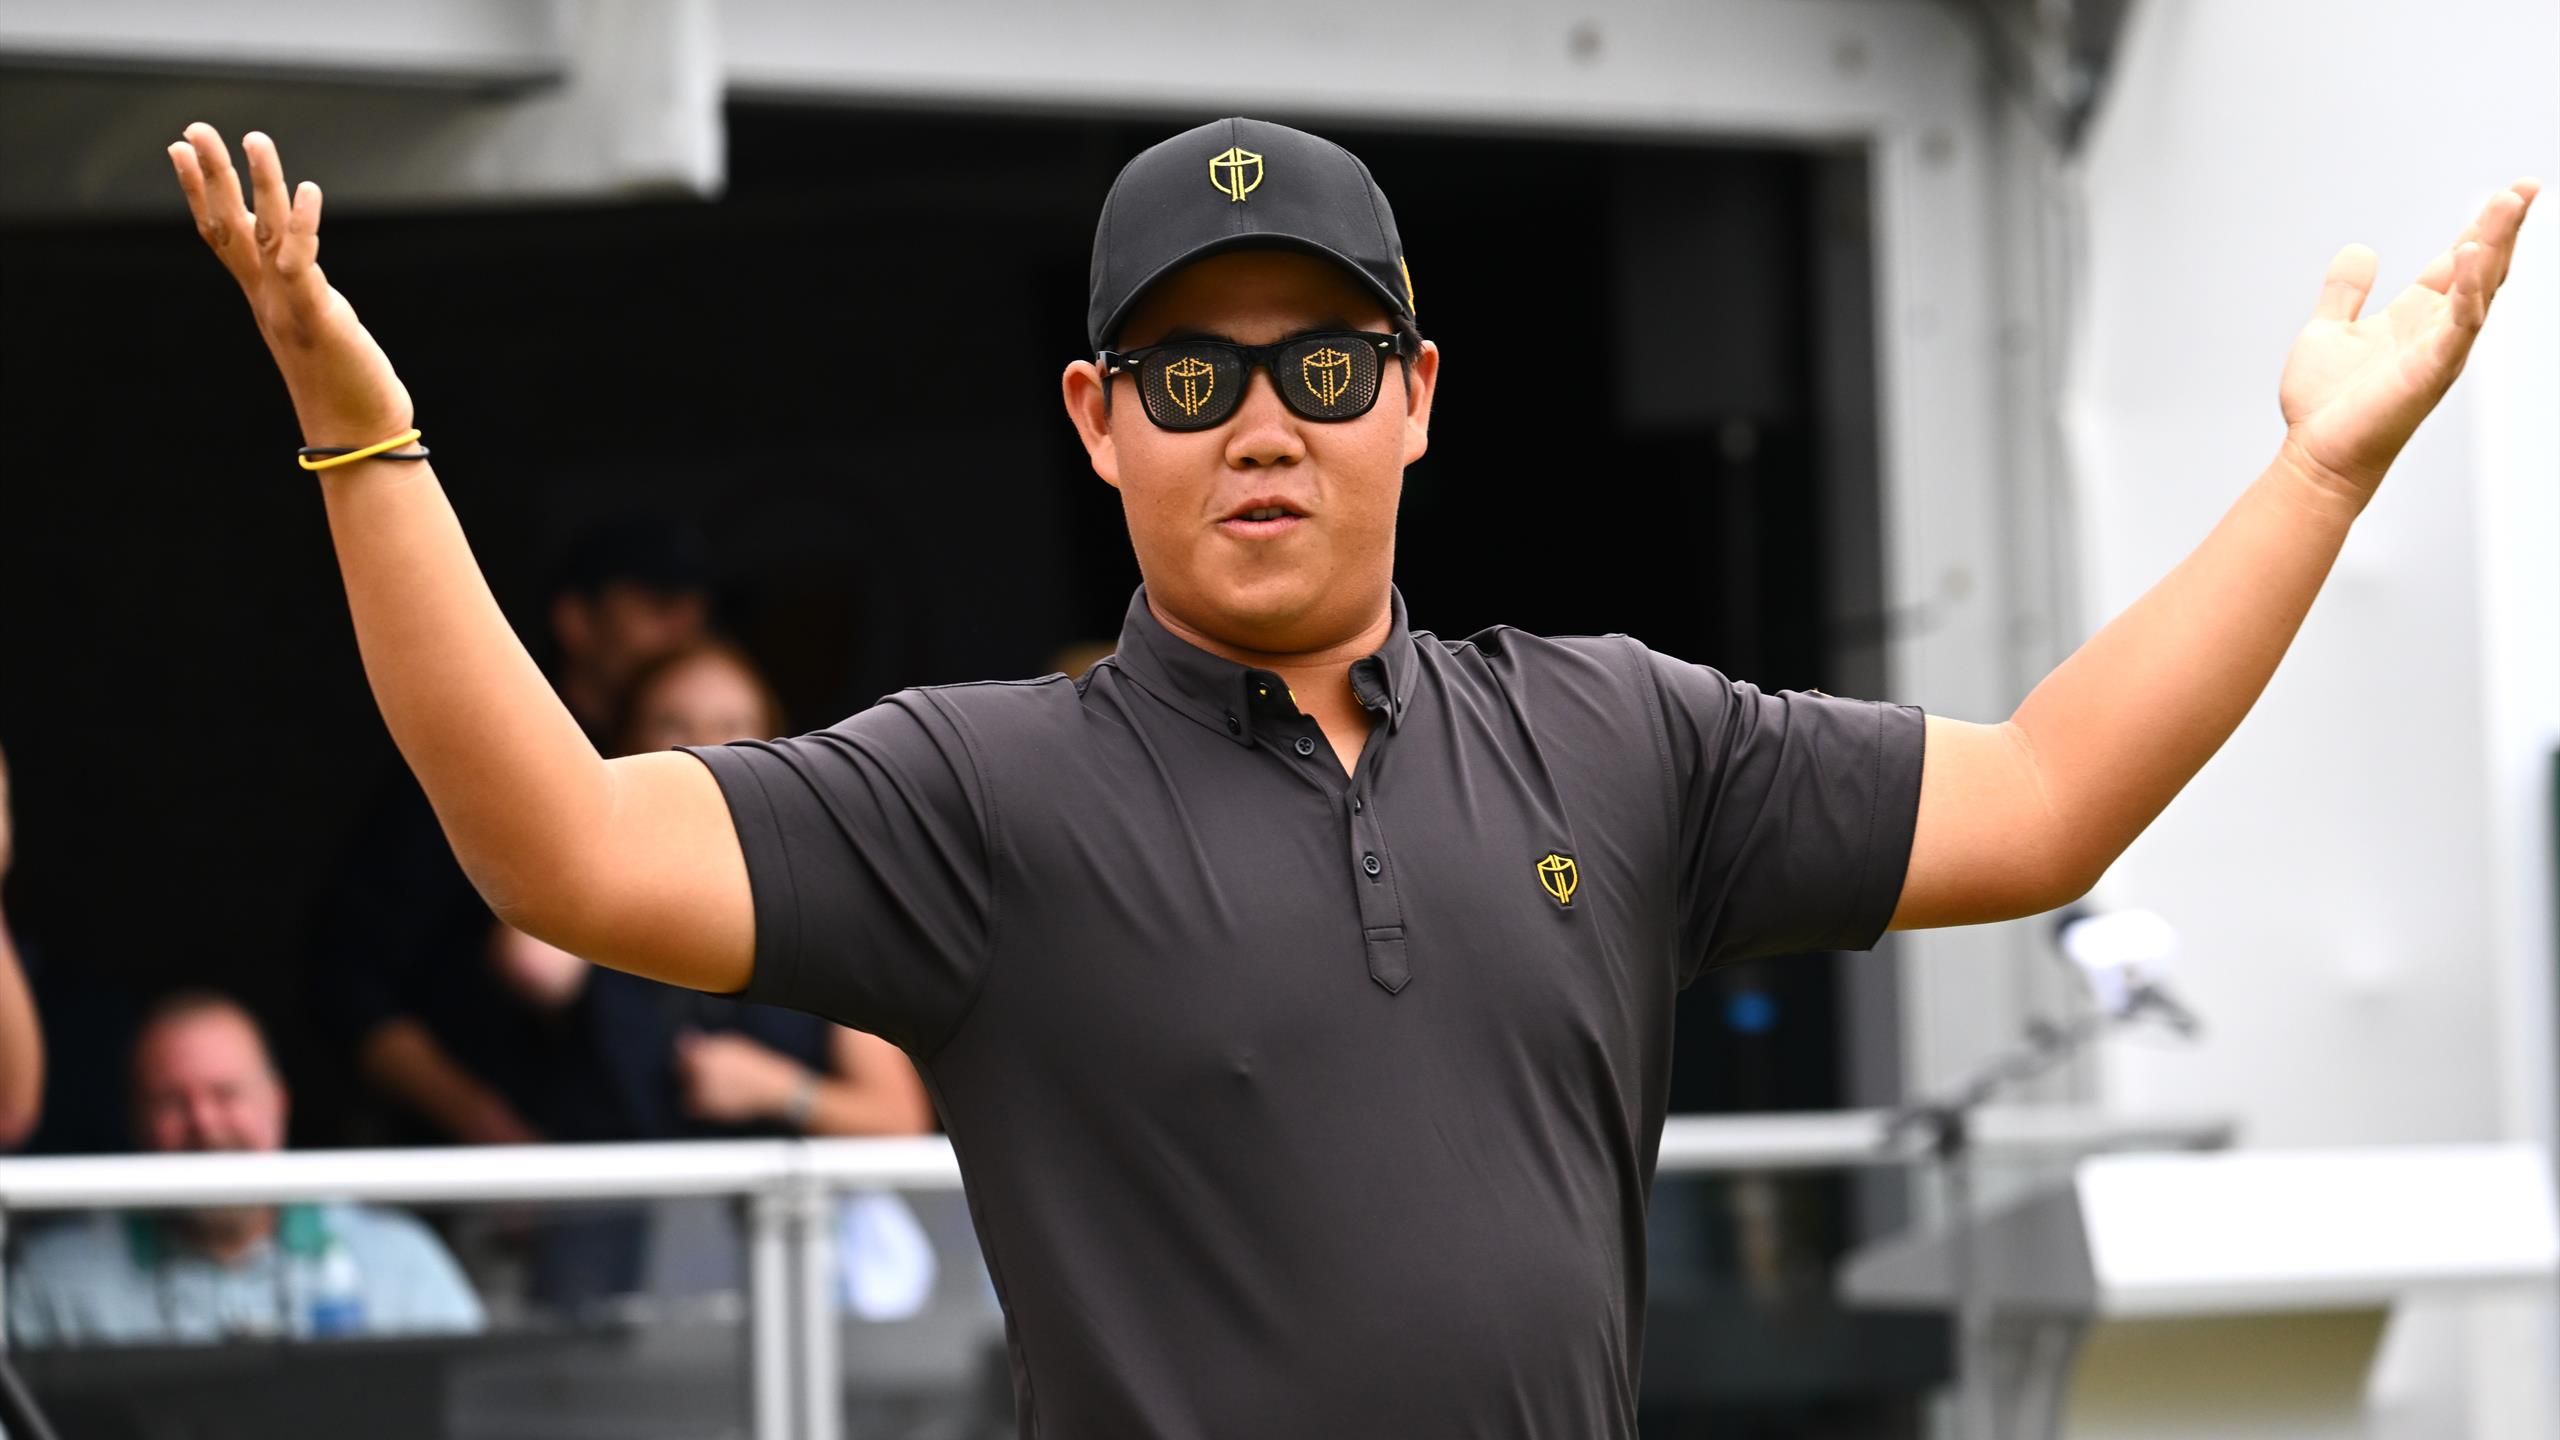 Come on, lets go! - The Presidents Cup was on life support, Tom Kim may have single-handedly saved it